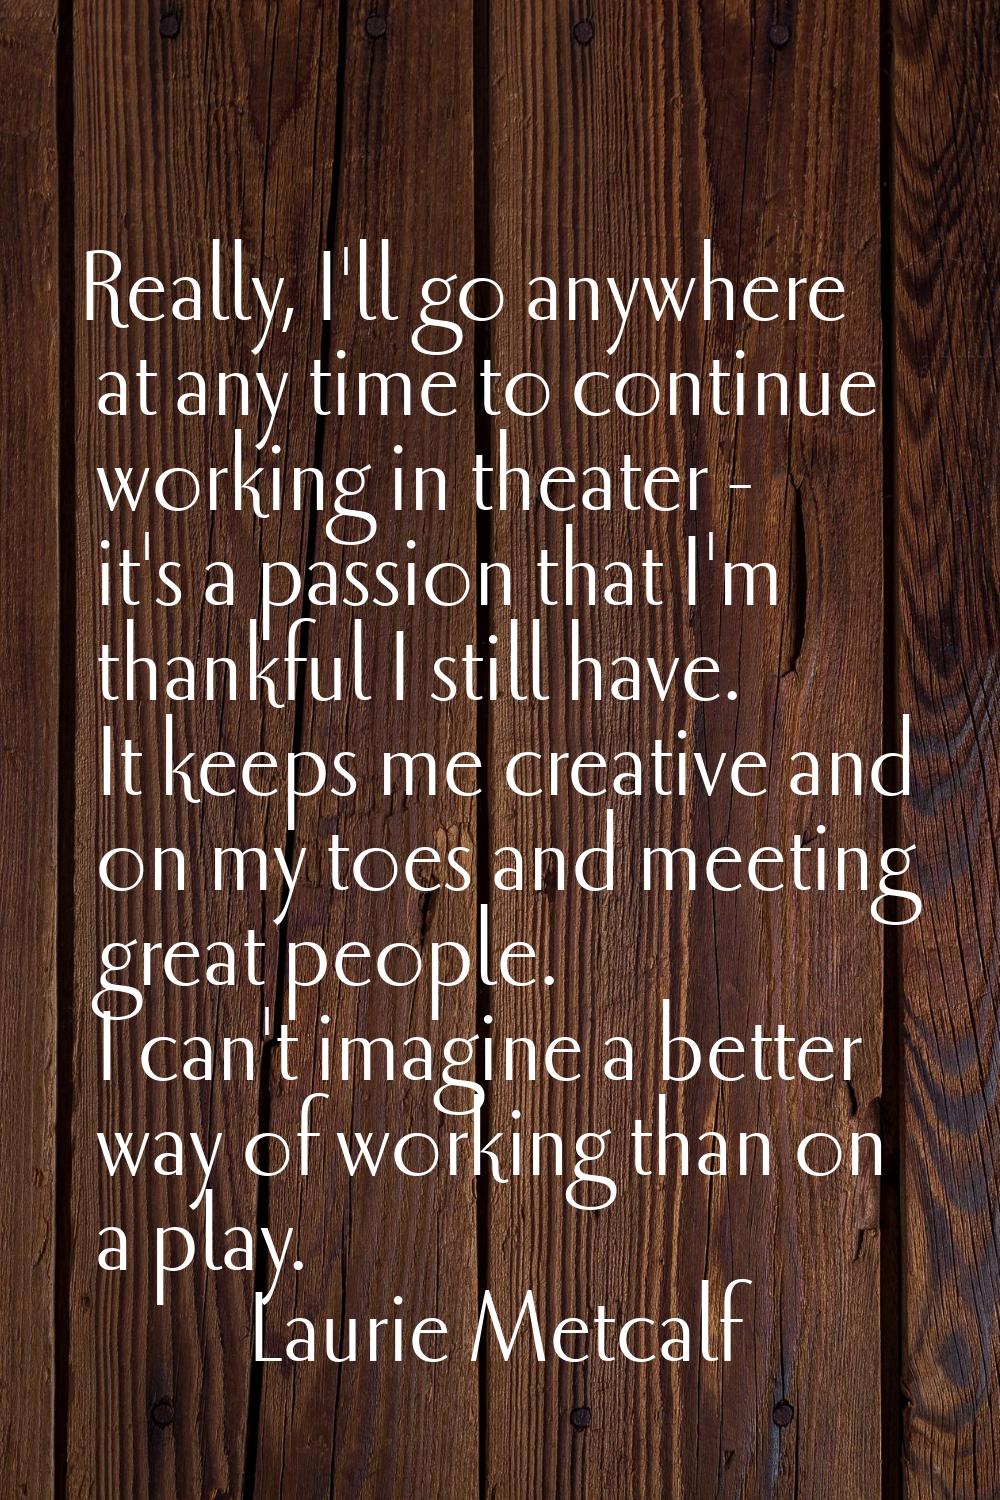 Really, I'll go anywhere at any time to continue working in theater - it's a passion that I'm thank